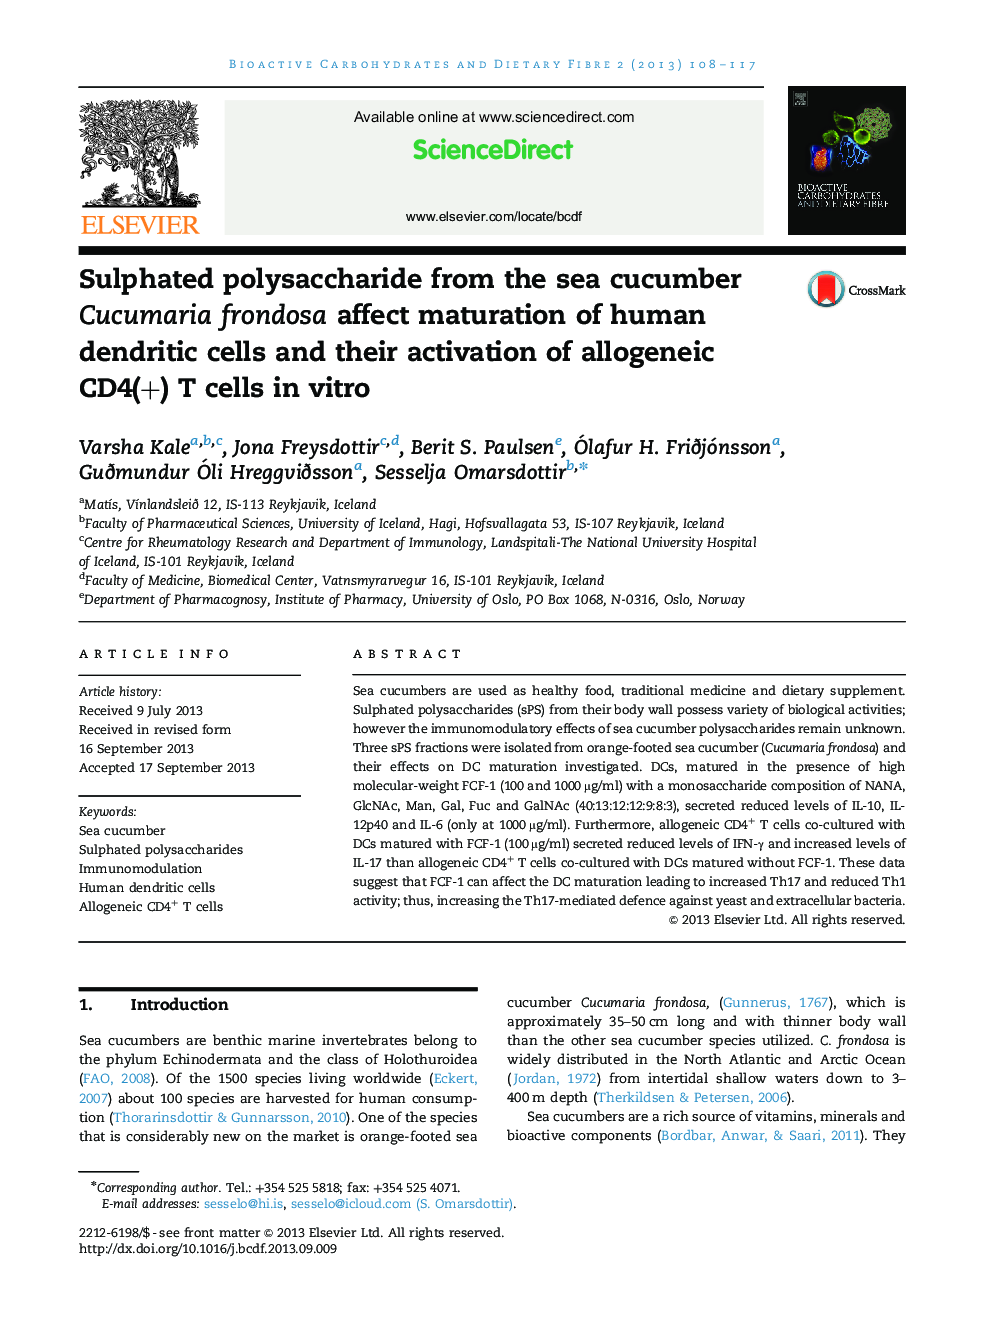 Sulphated polysaccharide from the sea cucumber Cucumaria frondosa affect maturation of human dendritic cells and their activation of allogeneic CD4(+) T cells in vitro